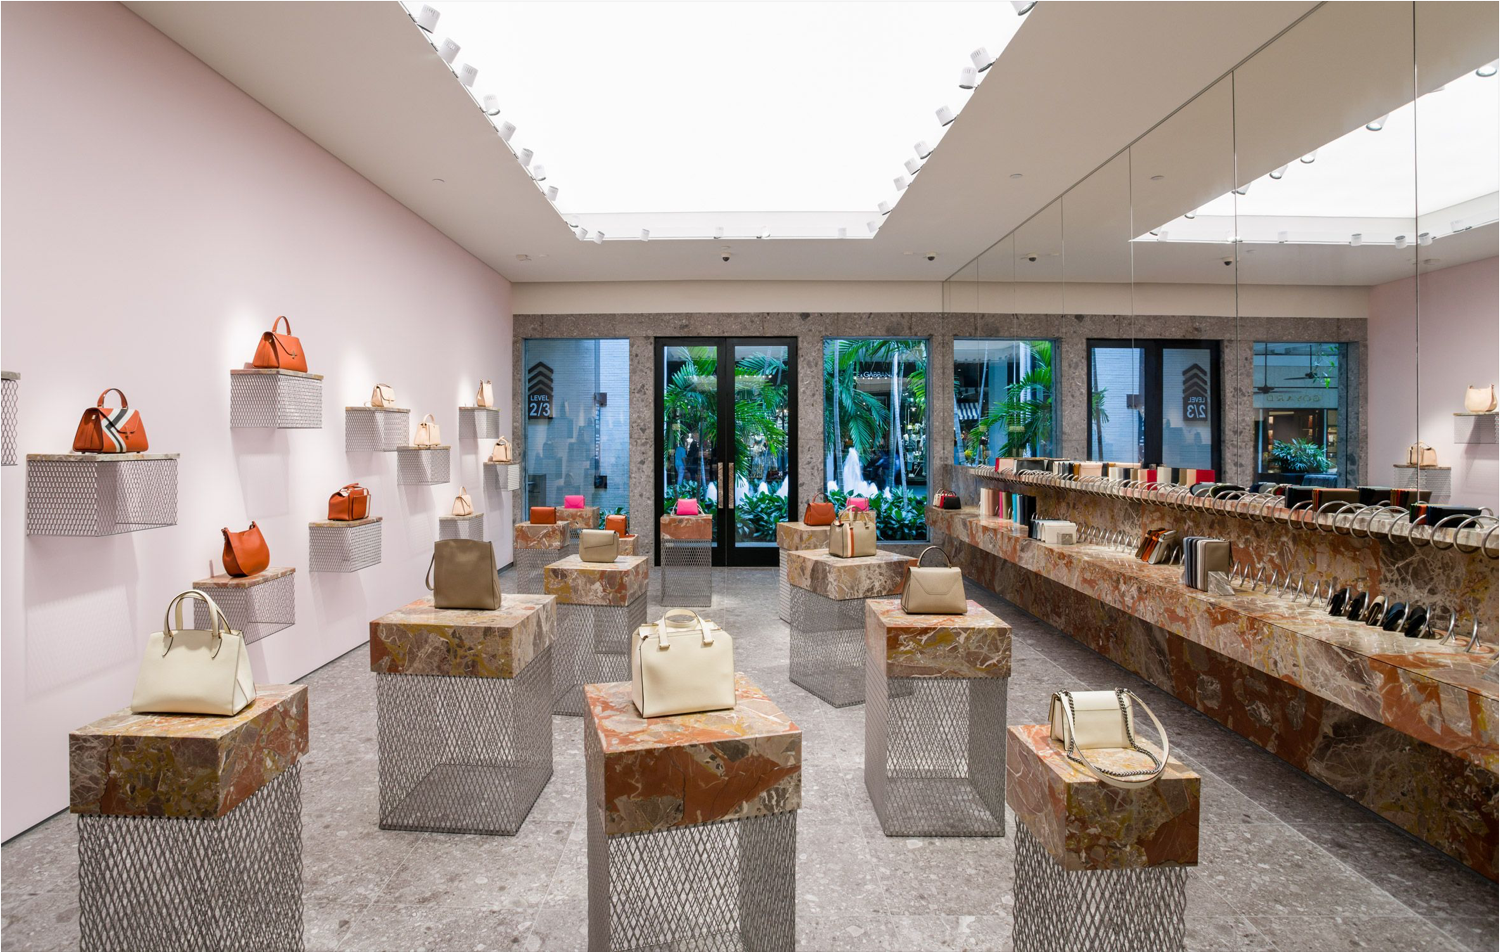 Get Lost with Gucci - Bal Harbour Shops